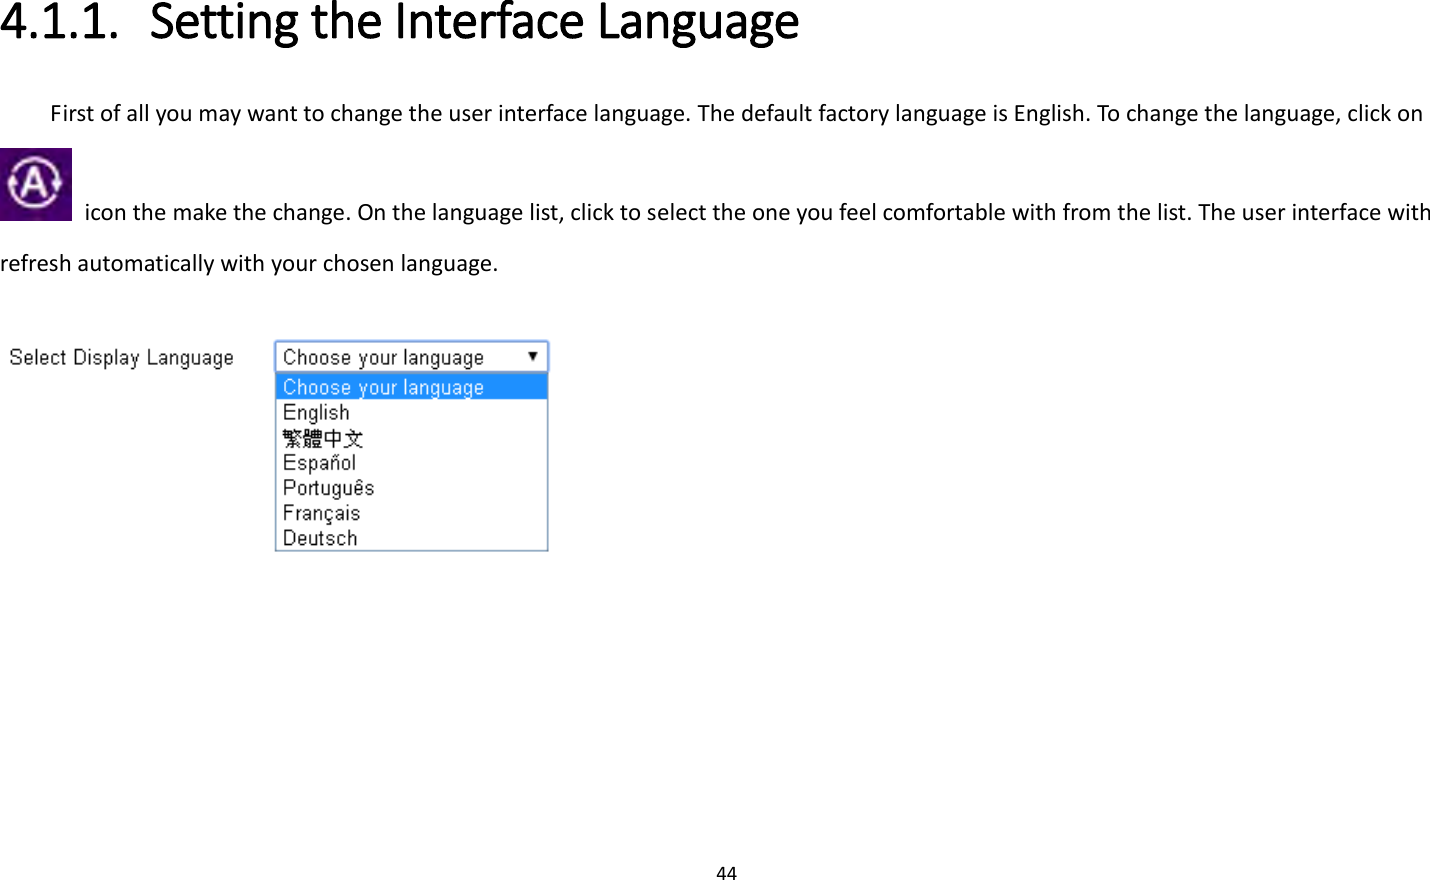 44  4.1.1. Setting the Interface Language   First of all you may want to change the user interface language. The default factory language is English. To change the language, click on   icon the make the change. On the language list, click to select the one you feel comfortable with from the list. The user interface with refresh automatically with your chosen language.      